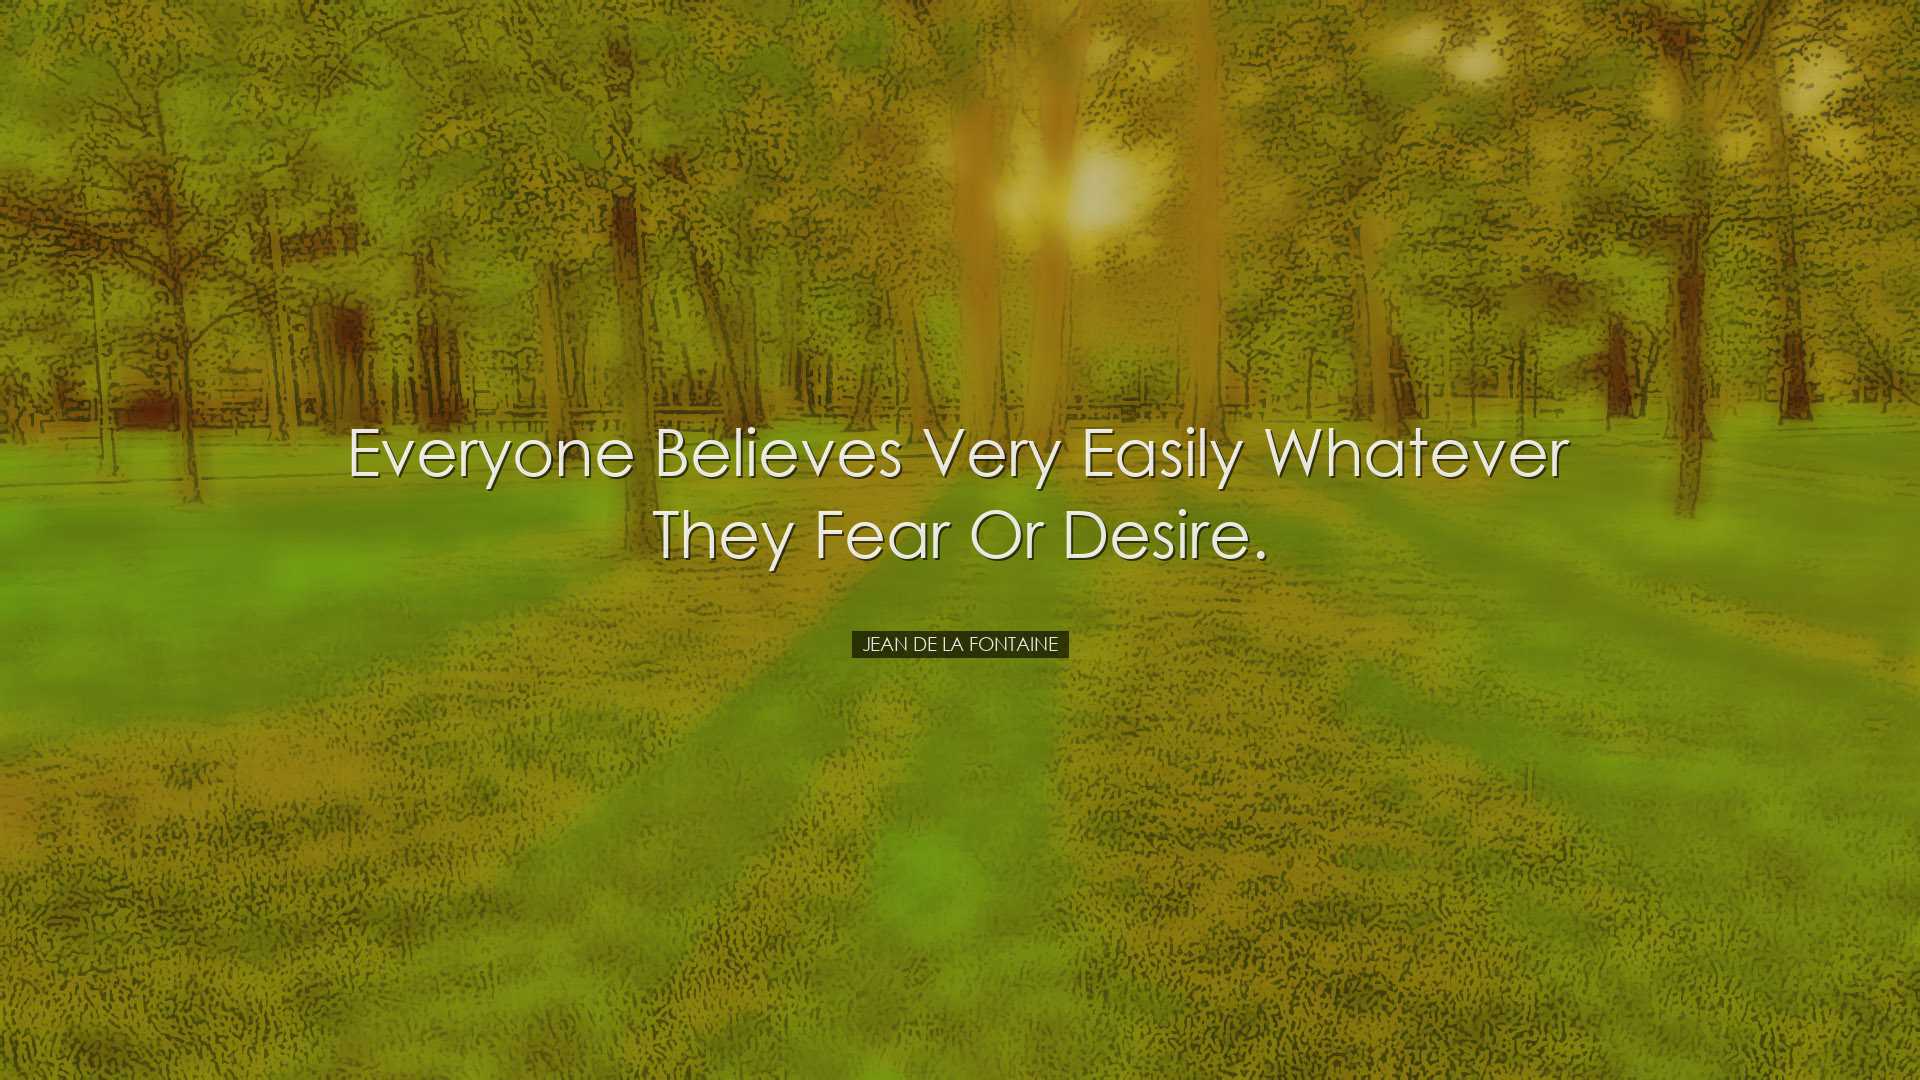 Everyone believes very easily whatever they fear or desire. - Jean